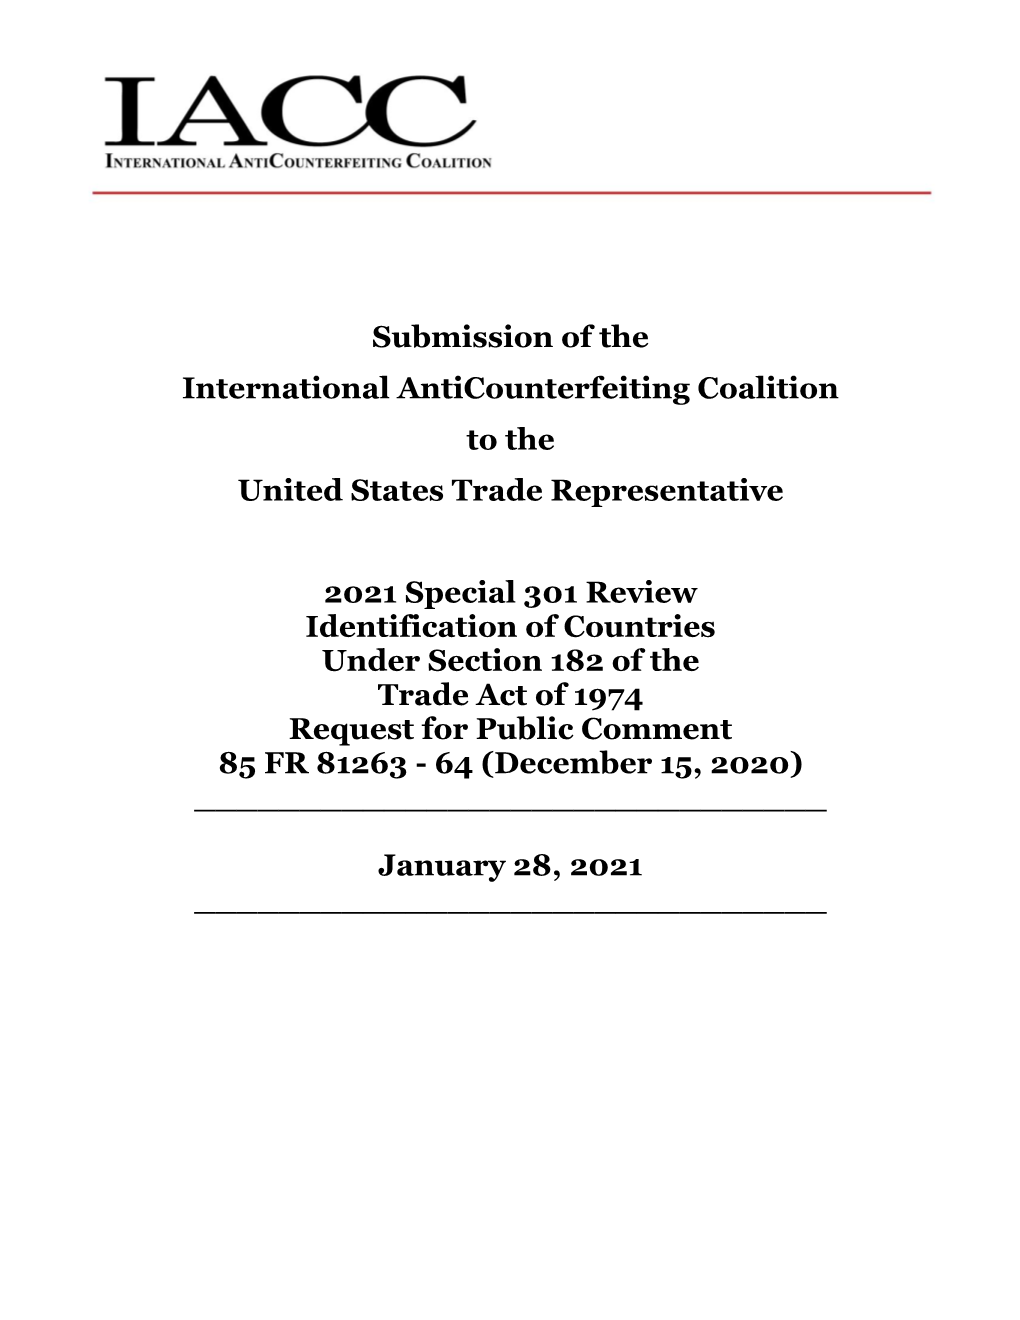 Submission of the International Anticounterfeiting Coalition to the United States Trade Representative 2021 Special 301 Review